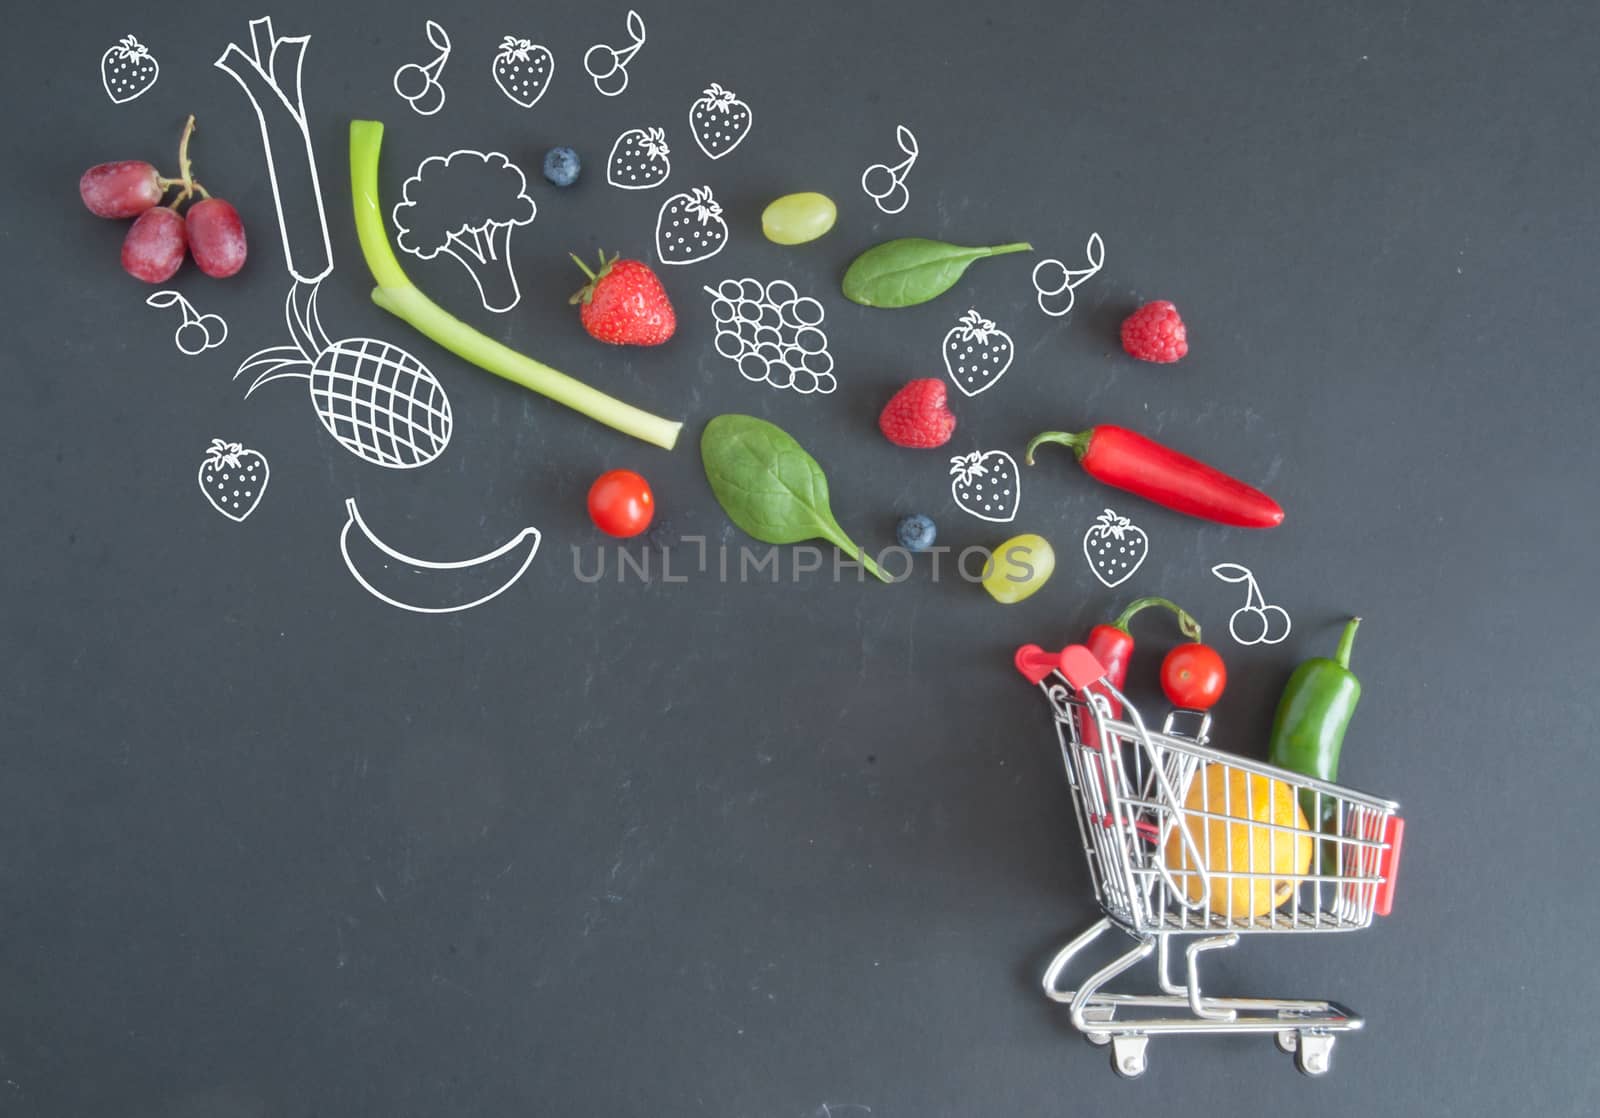 Grocery shopping cart filled with fruits and vegetables and sketches on a chalkboard 